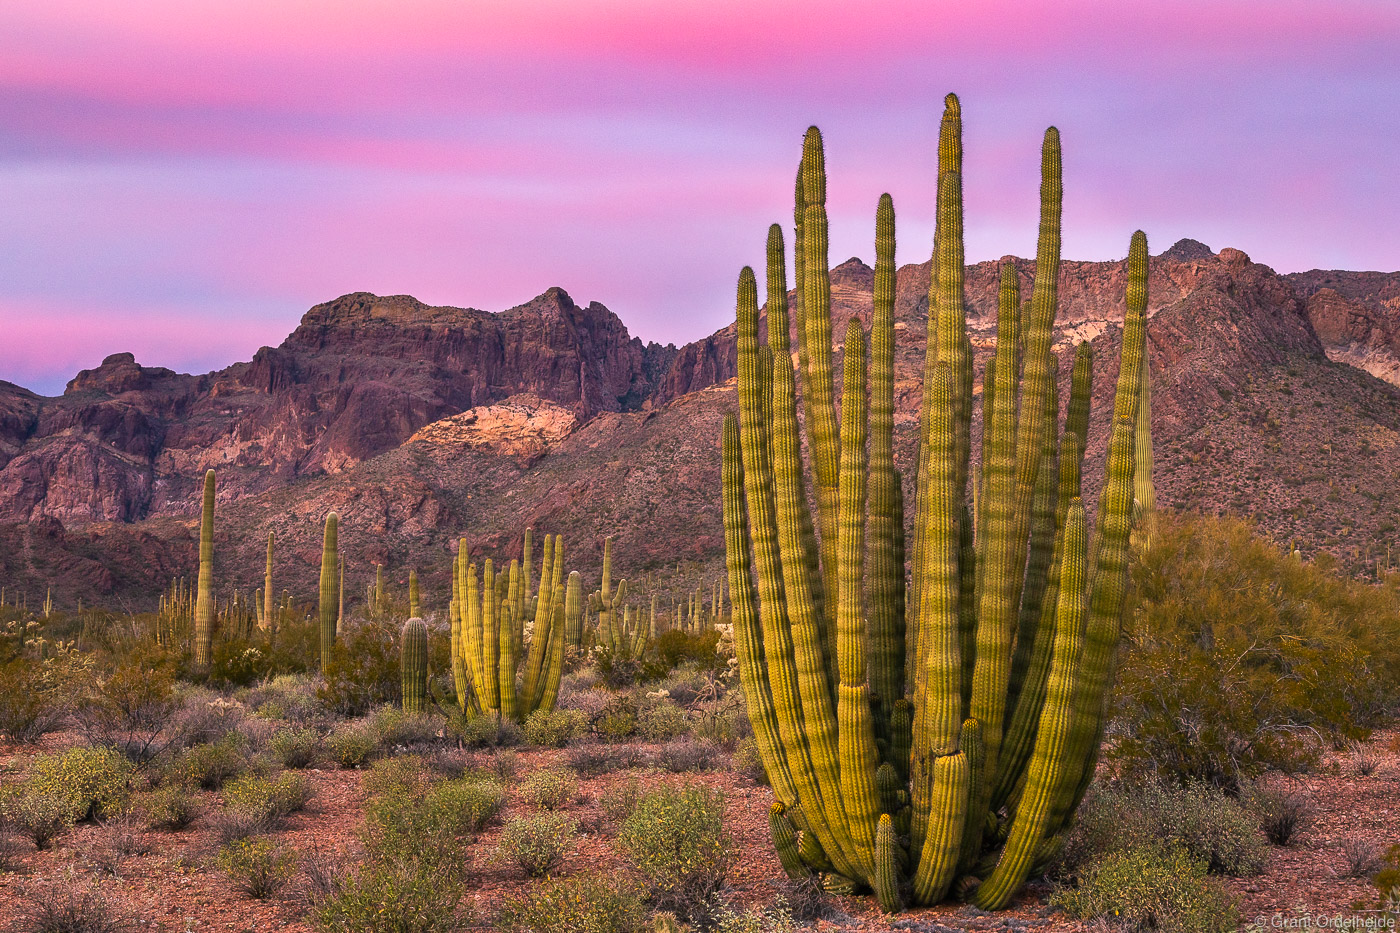 An Organ pipe cactus and the Ajo mountains in Arizona's Organ Pipe Cactus National Monument.